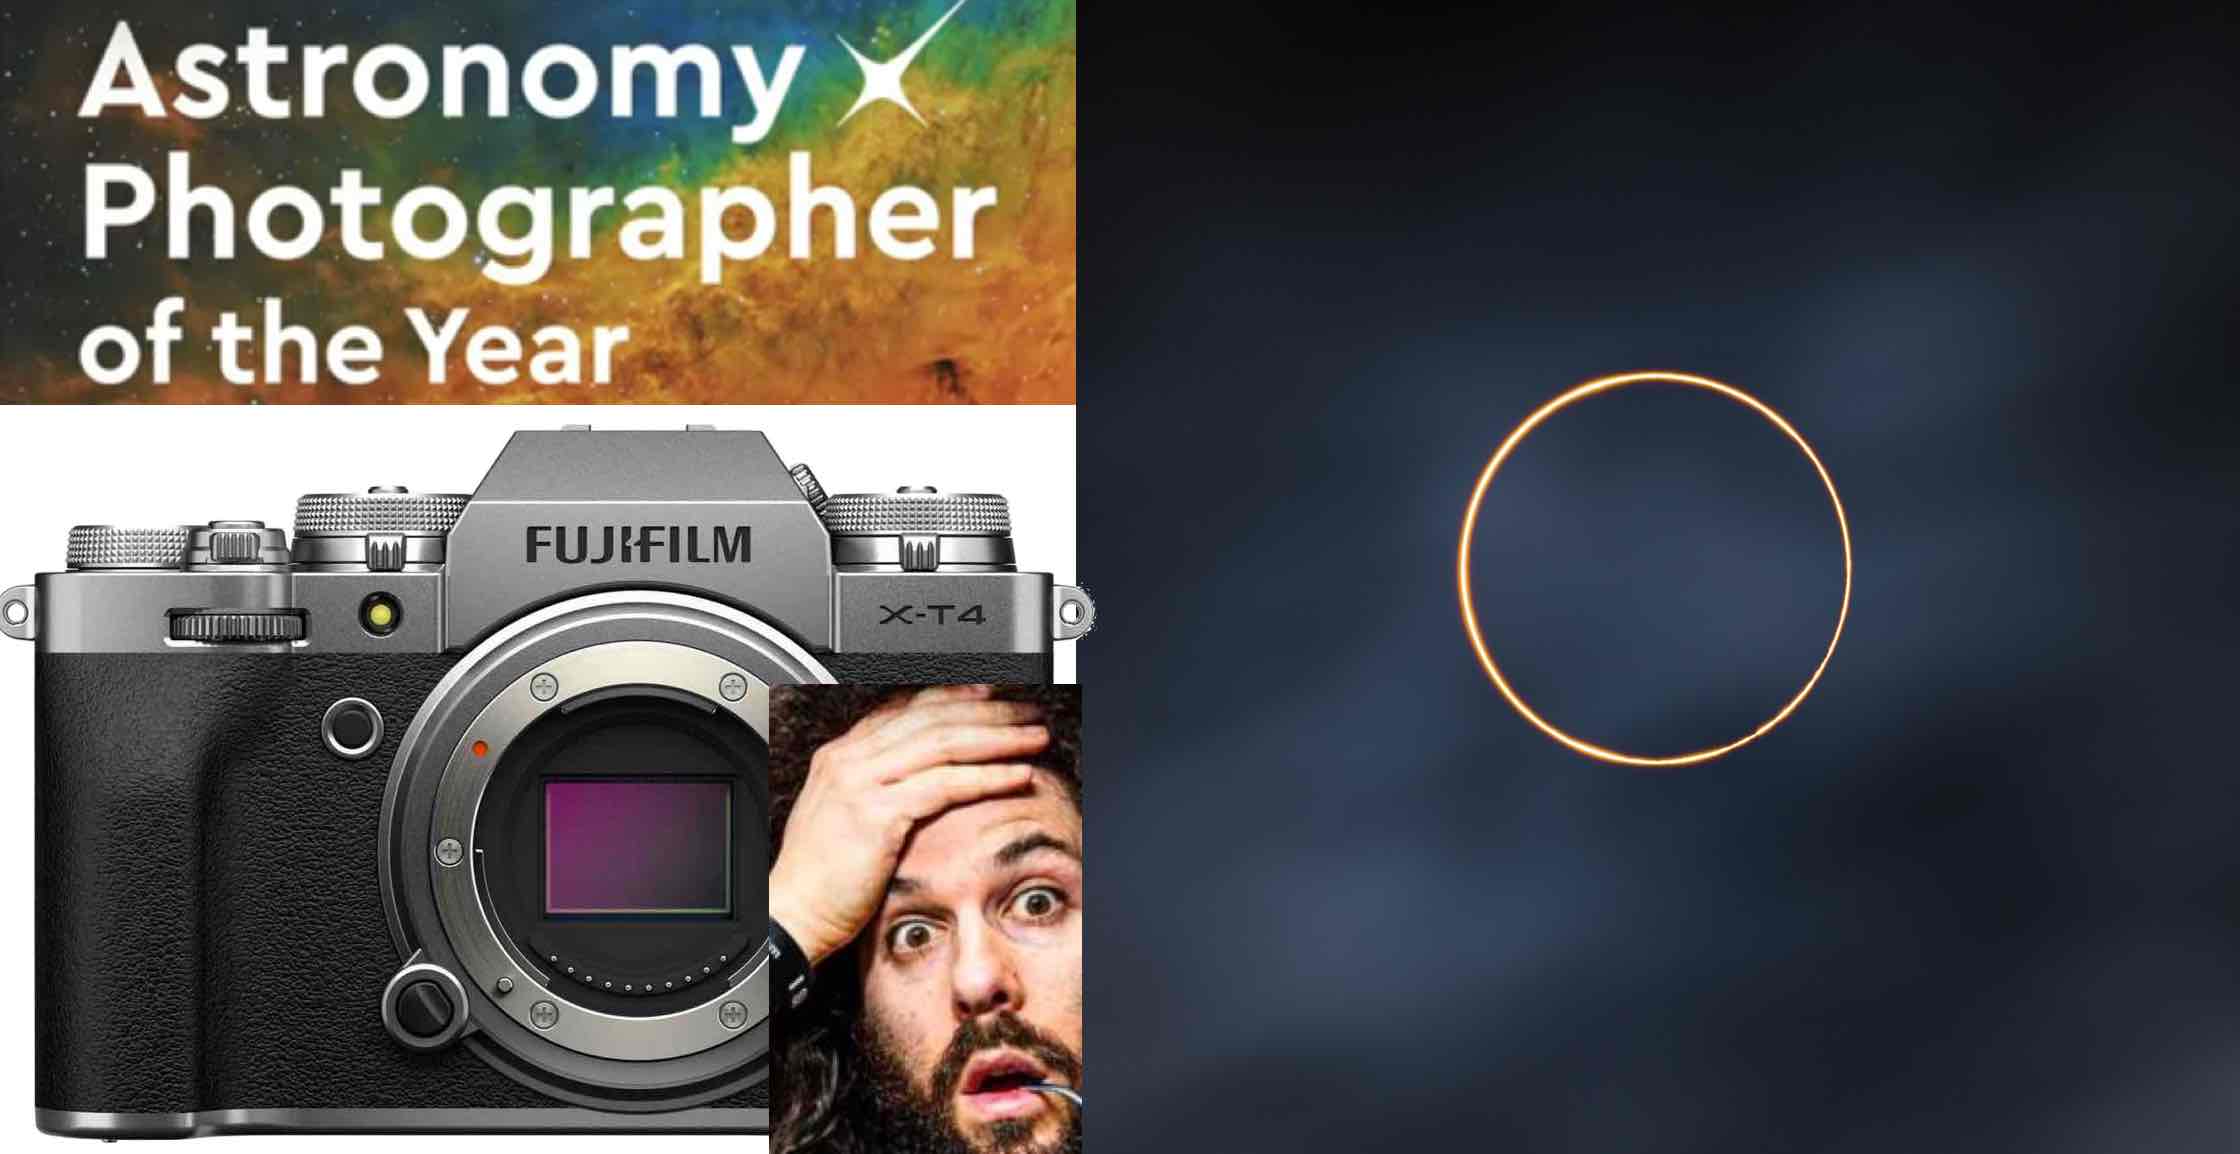 Royal Observatory Greenwich Assigns Astronomy Photographer of the Year  Award to Fujifilm X-T4 Shooter Shuchang Dong - Fuji Rumors